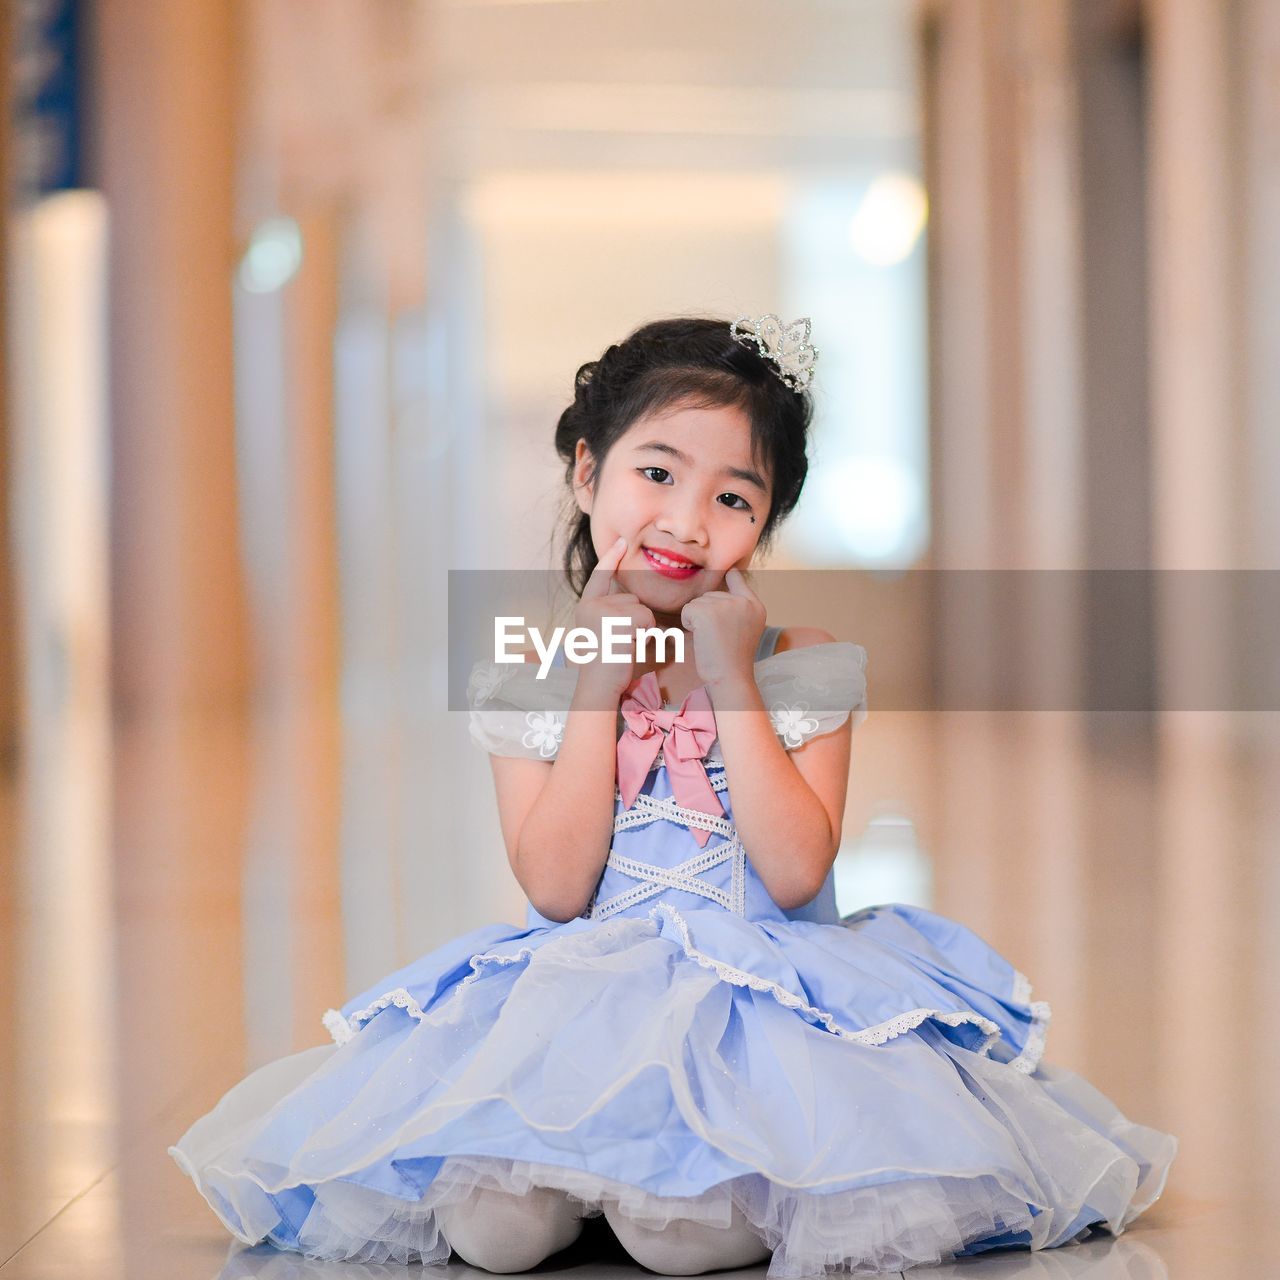 EyeEm Selects One Girl Only Child Children Only Girls One Person Childhood Looking At Camera Sitting Portrait People Indoors  Front View Human Body Part Ballet Dancer Ballet Arts Culture And Entertainment Beauty Tiara Day Close-up